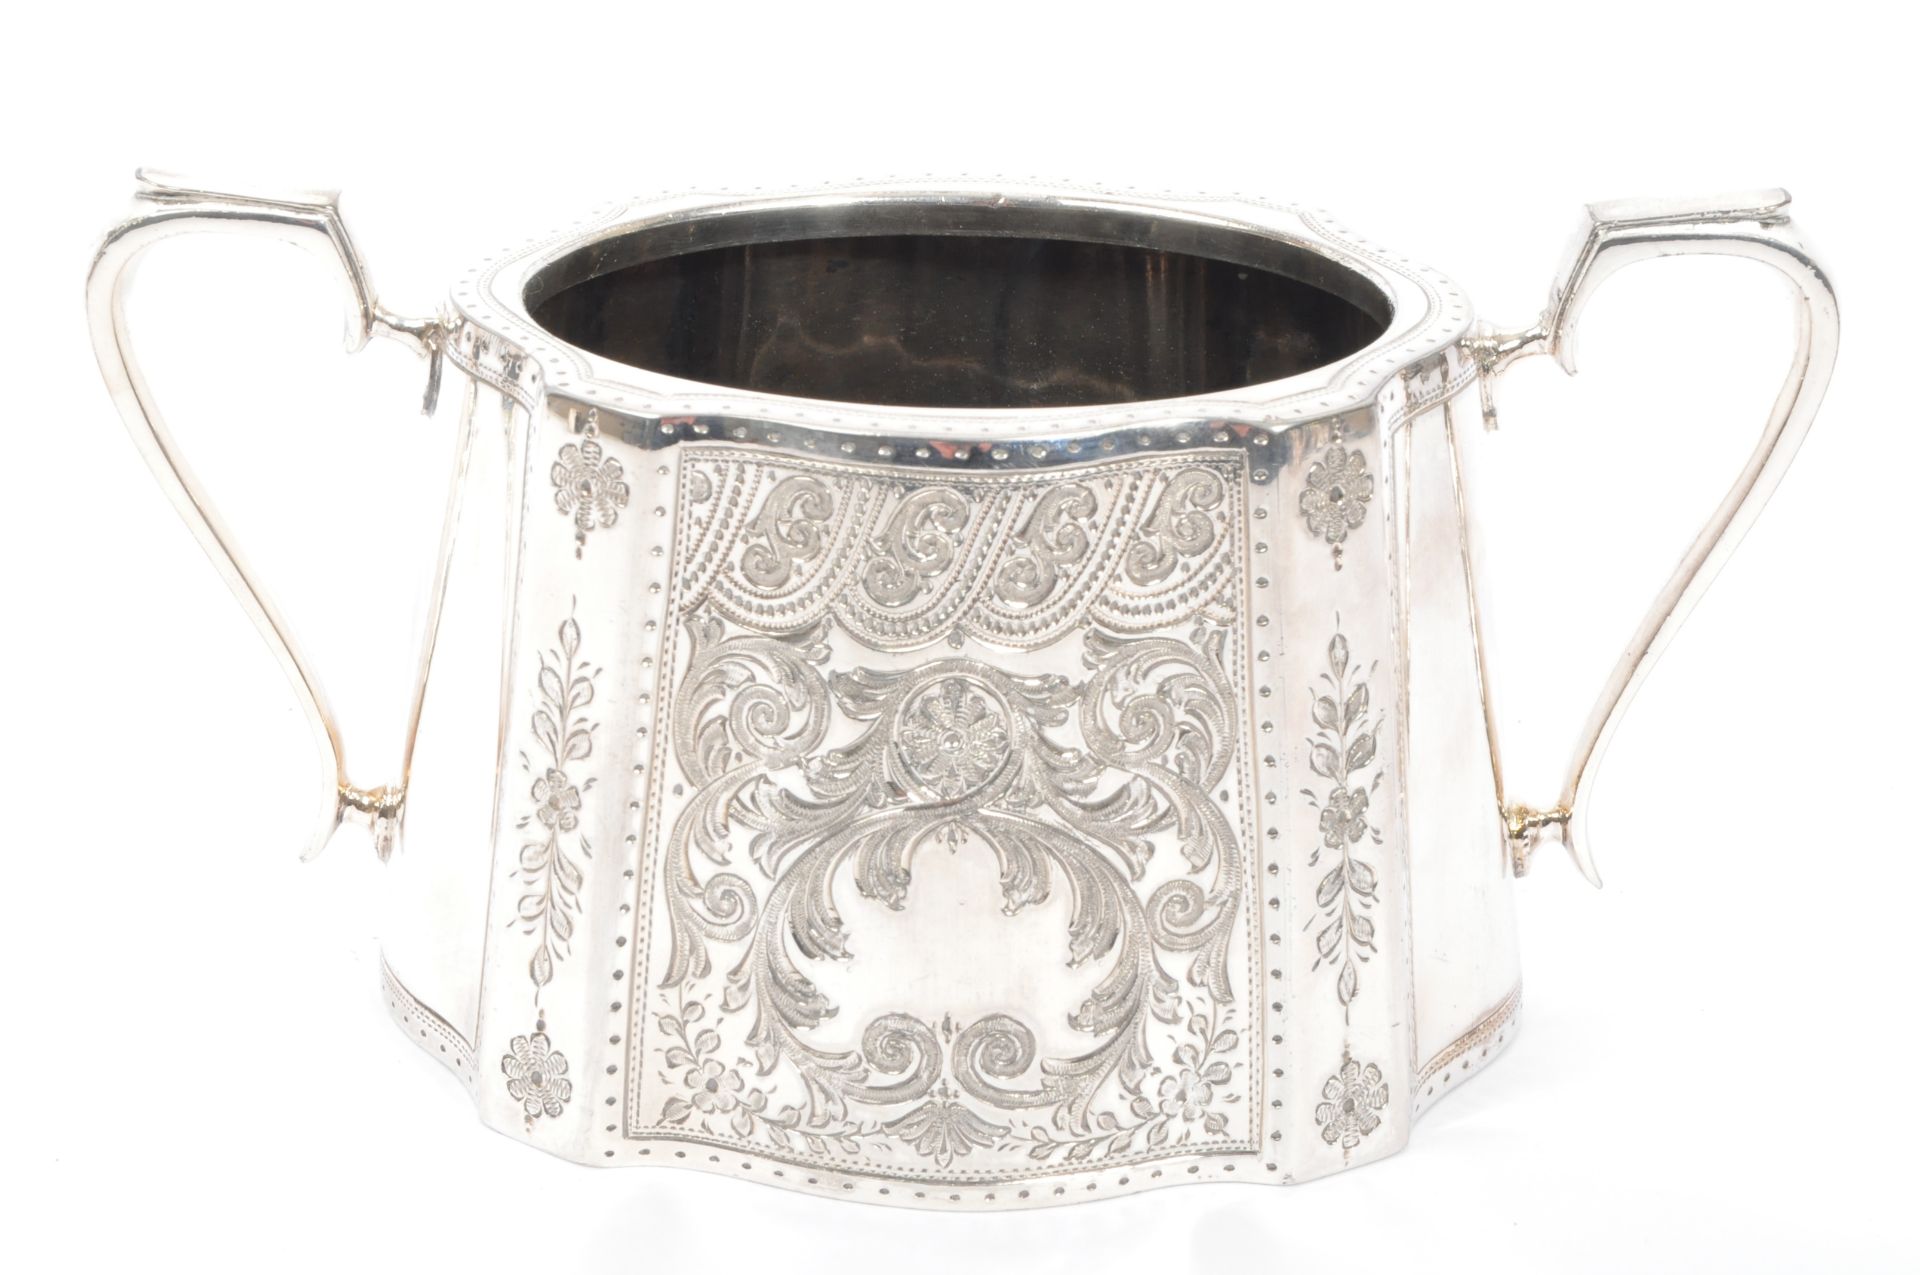 EARLY 20TH CENTURY WALKER & HALL, SHEFFIELD SILVER PLATED ITEMS - Image 5 of 7